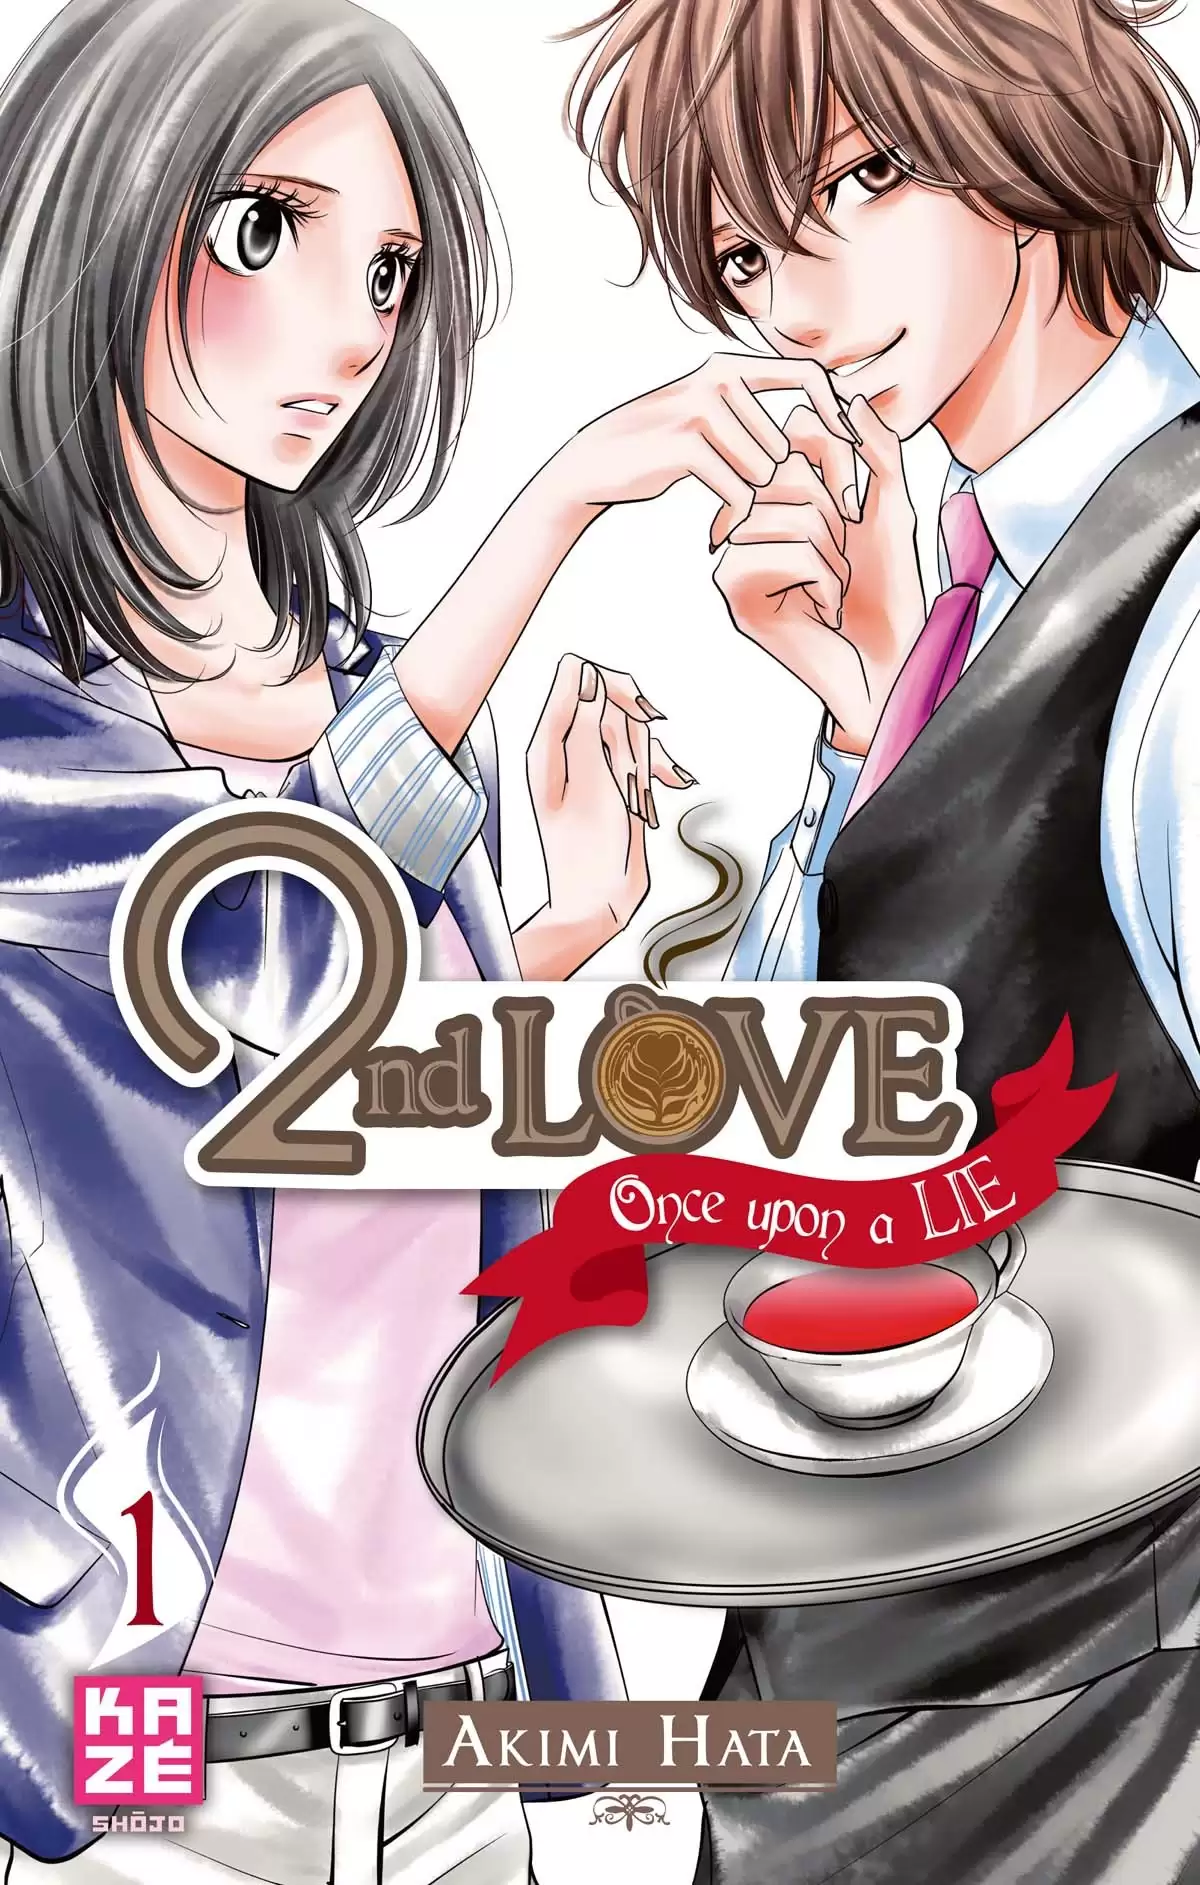 2nd love – Once upon a lie Volume 1 page 1